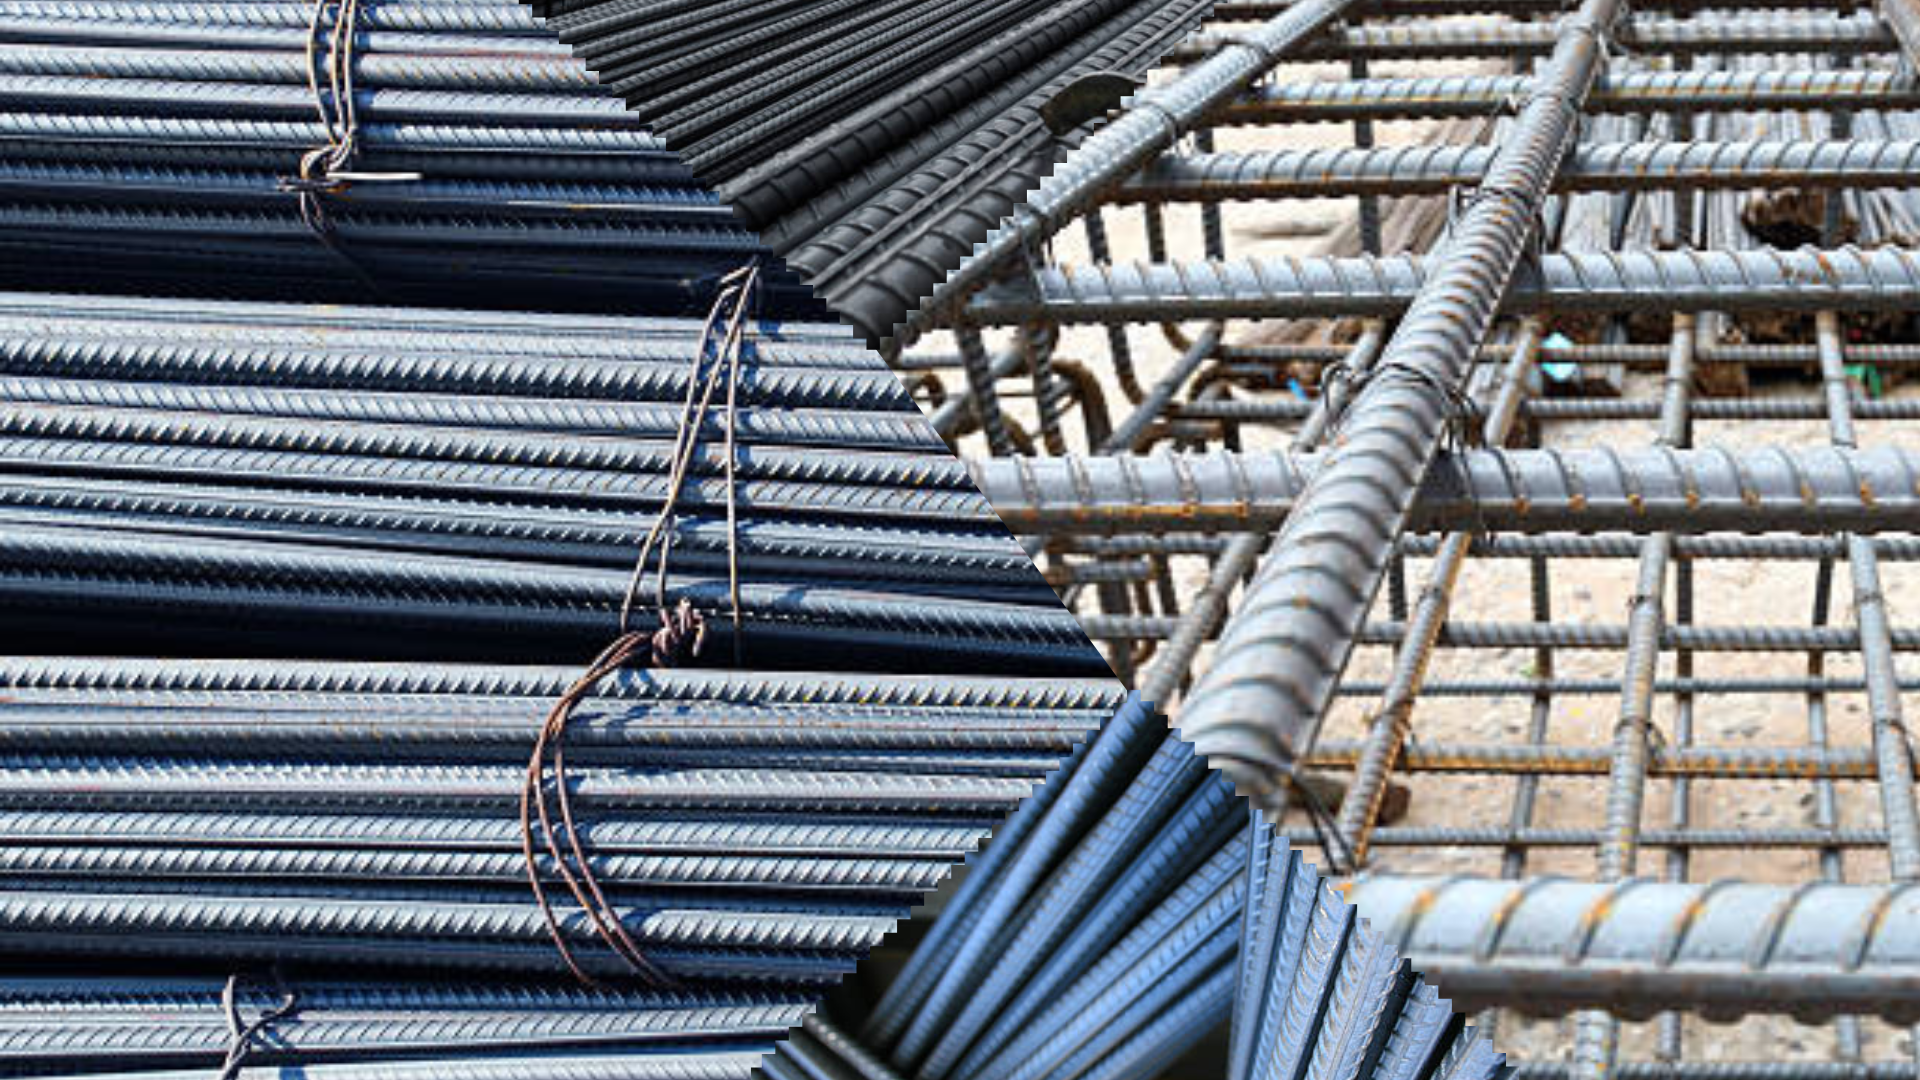 Things to Consider Before Purchasing TMT Steel Bars